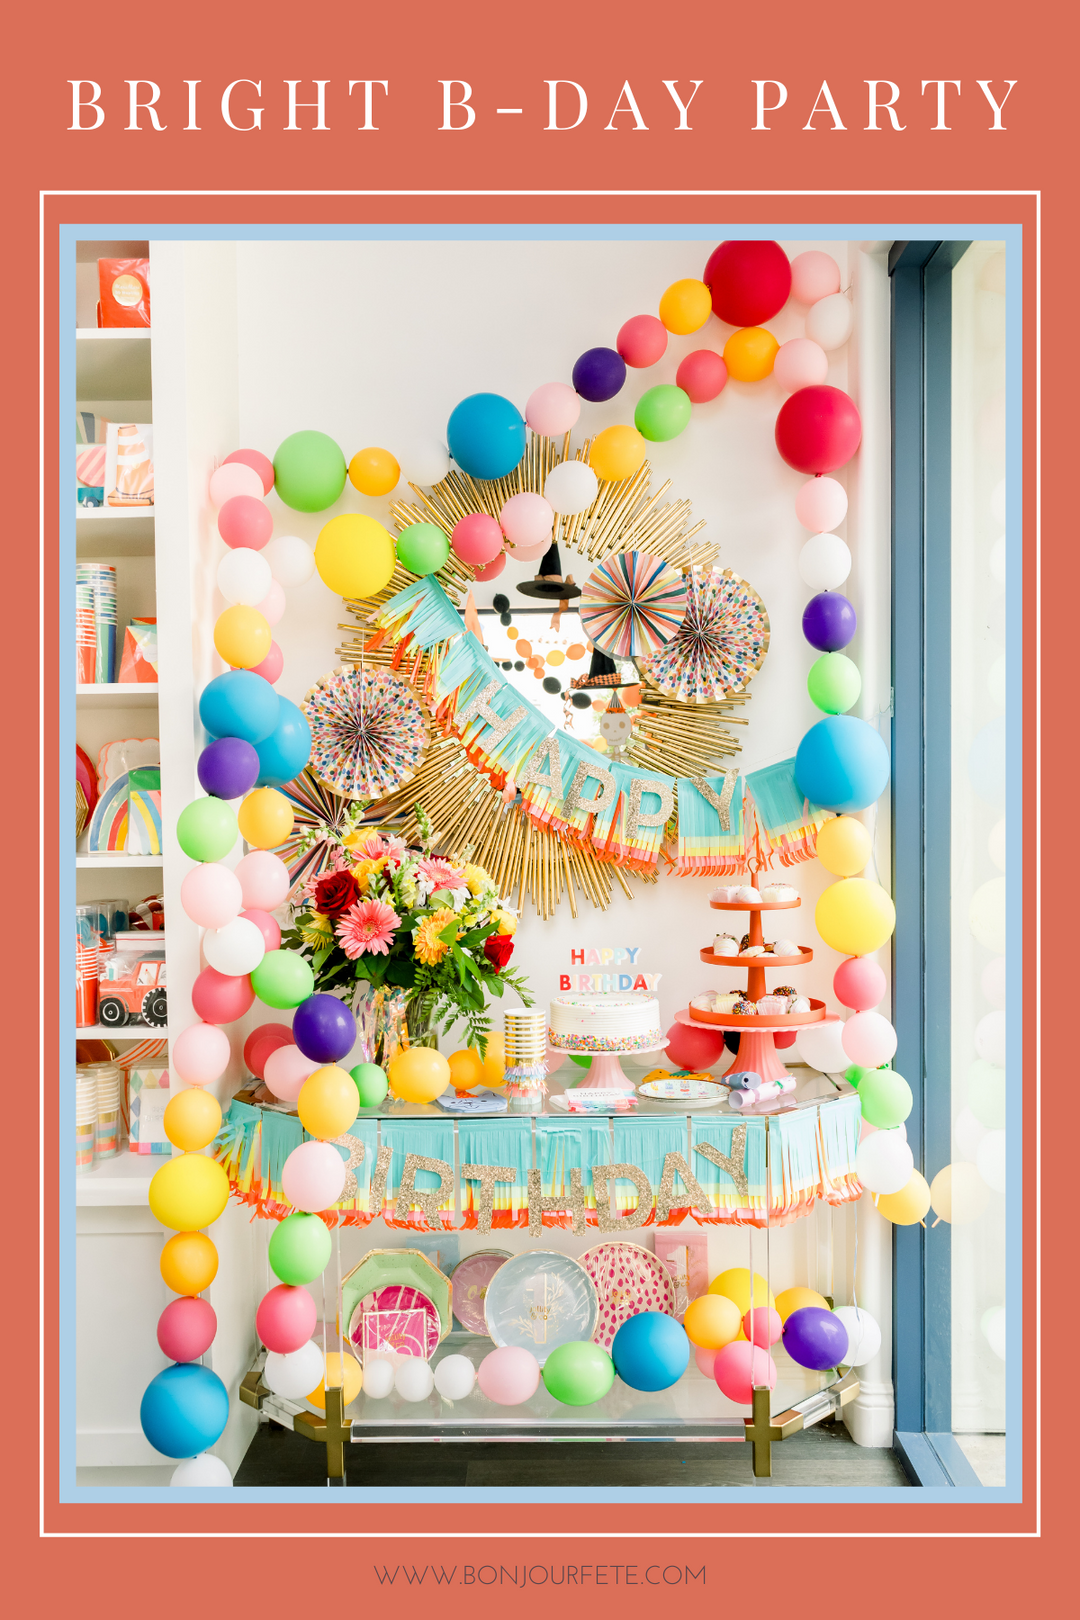 BEST BIRTHDAY PARTY IDEAS AND DECORATIONS FOR EVERYONE